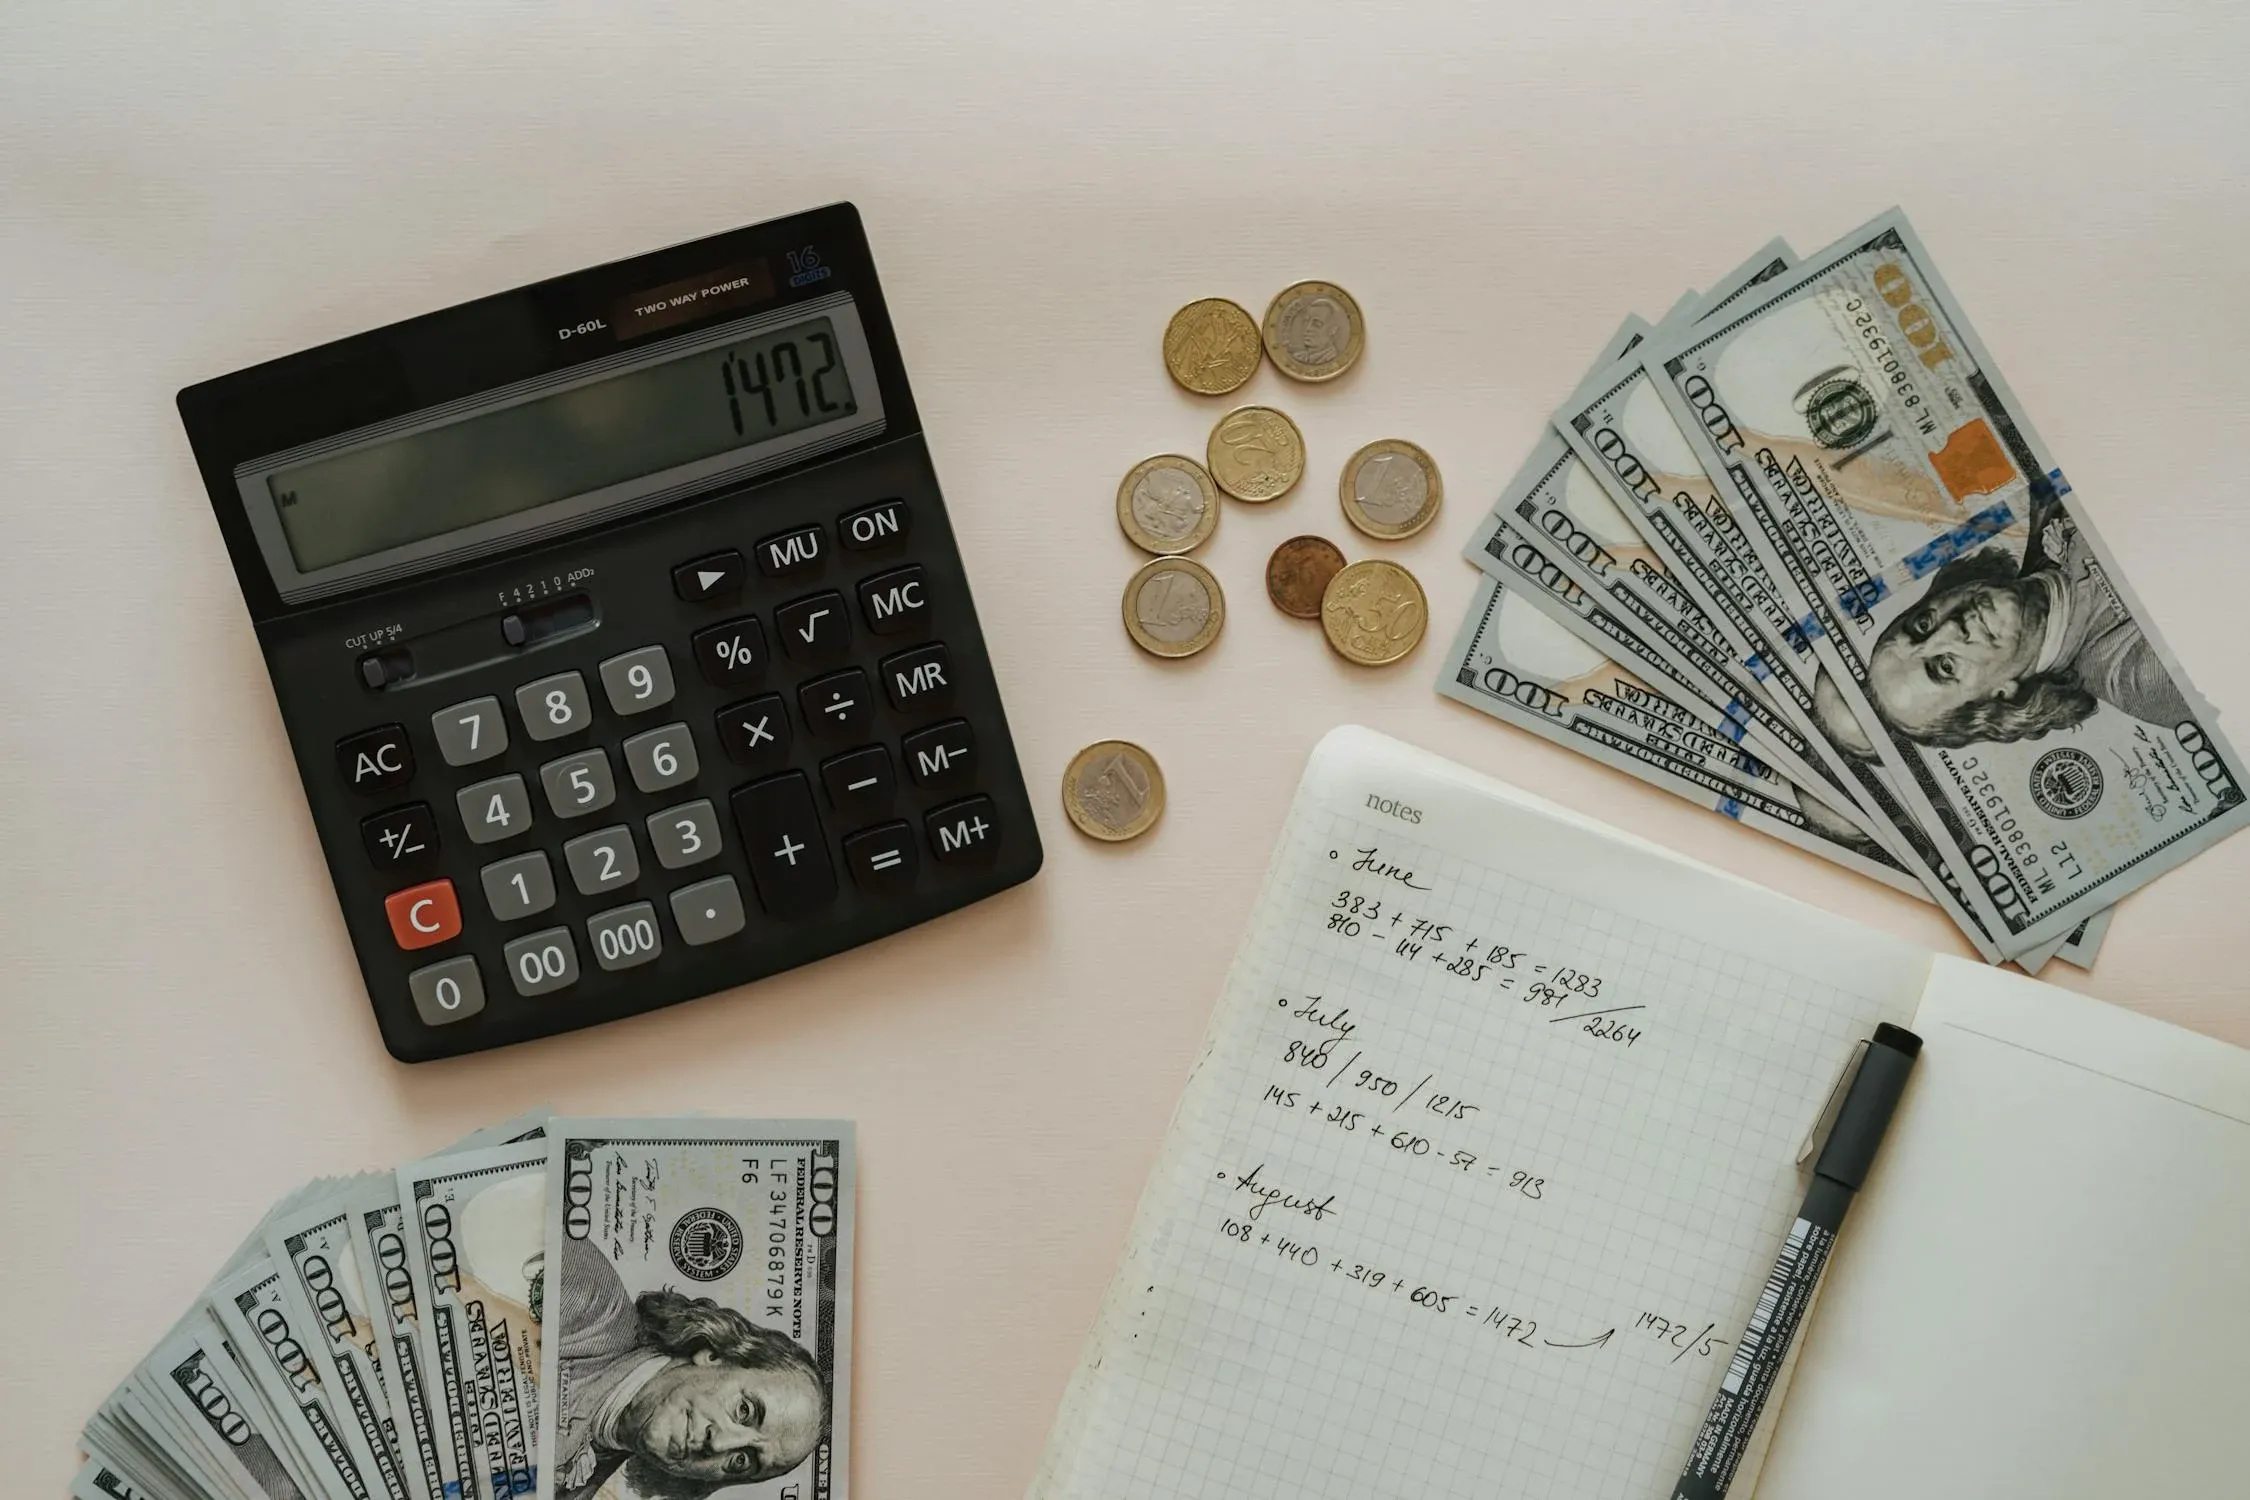 Header image showing a calculator and money